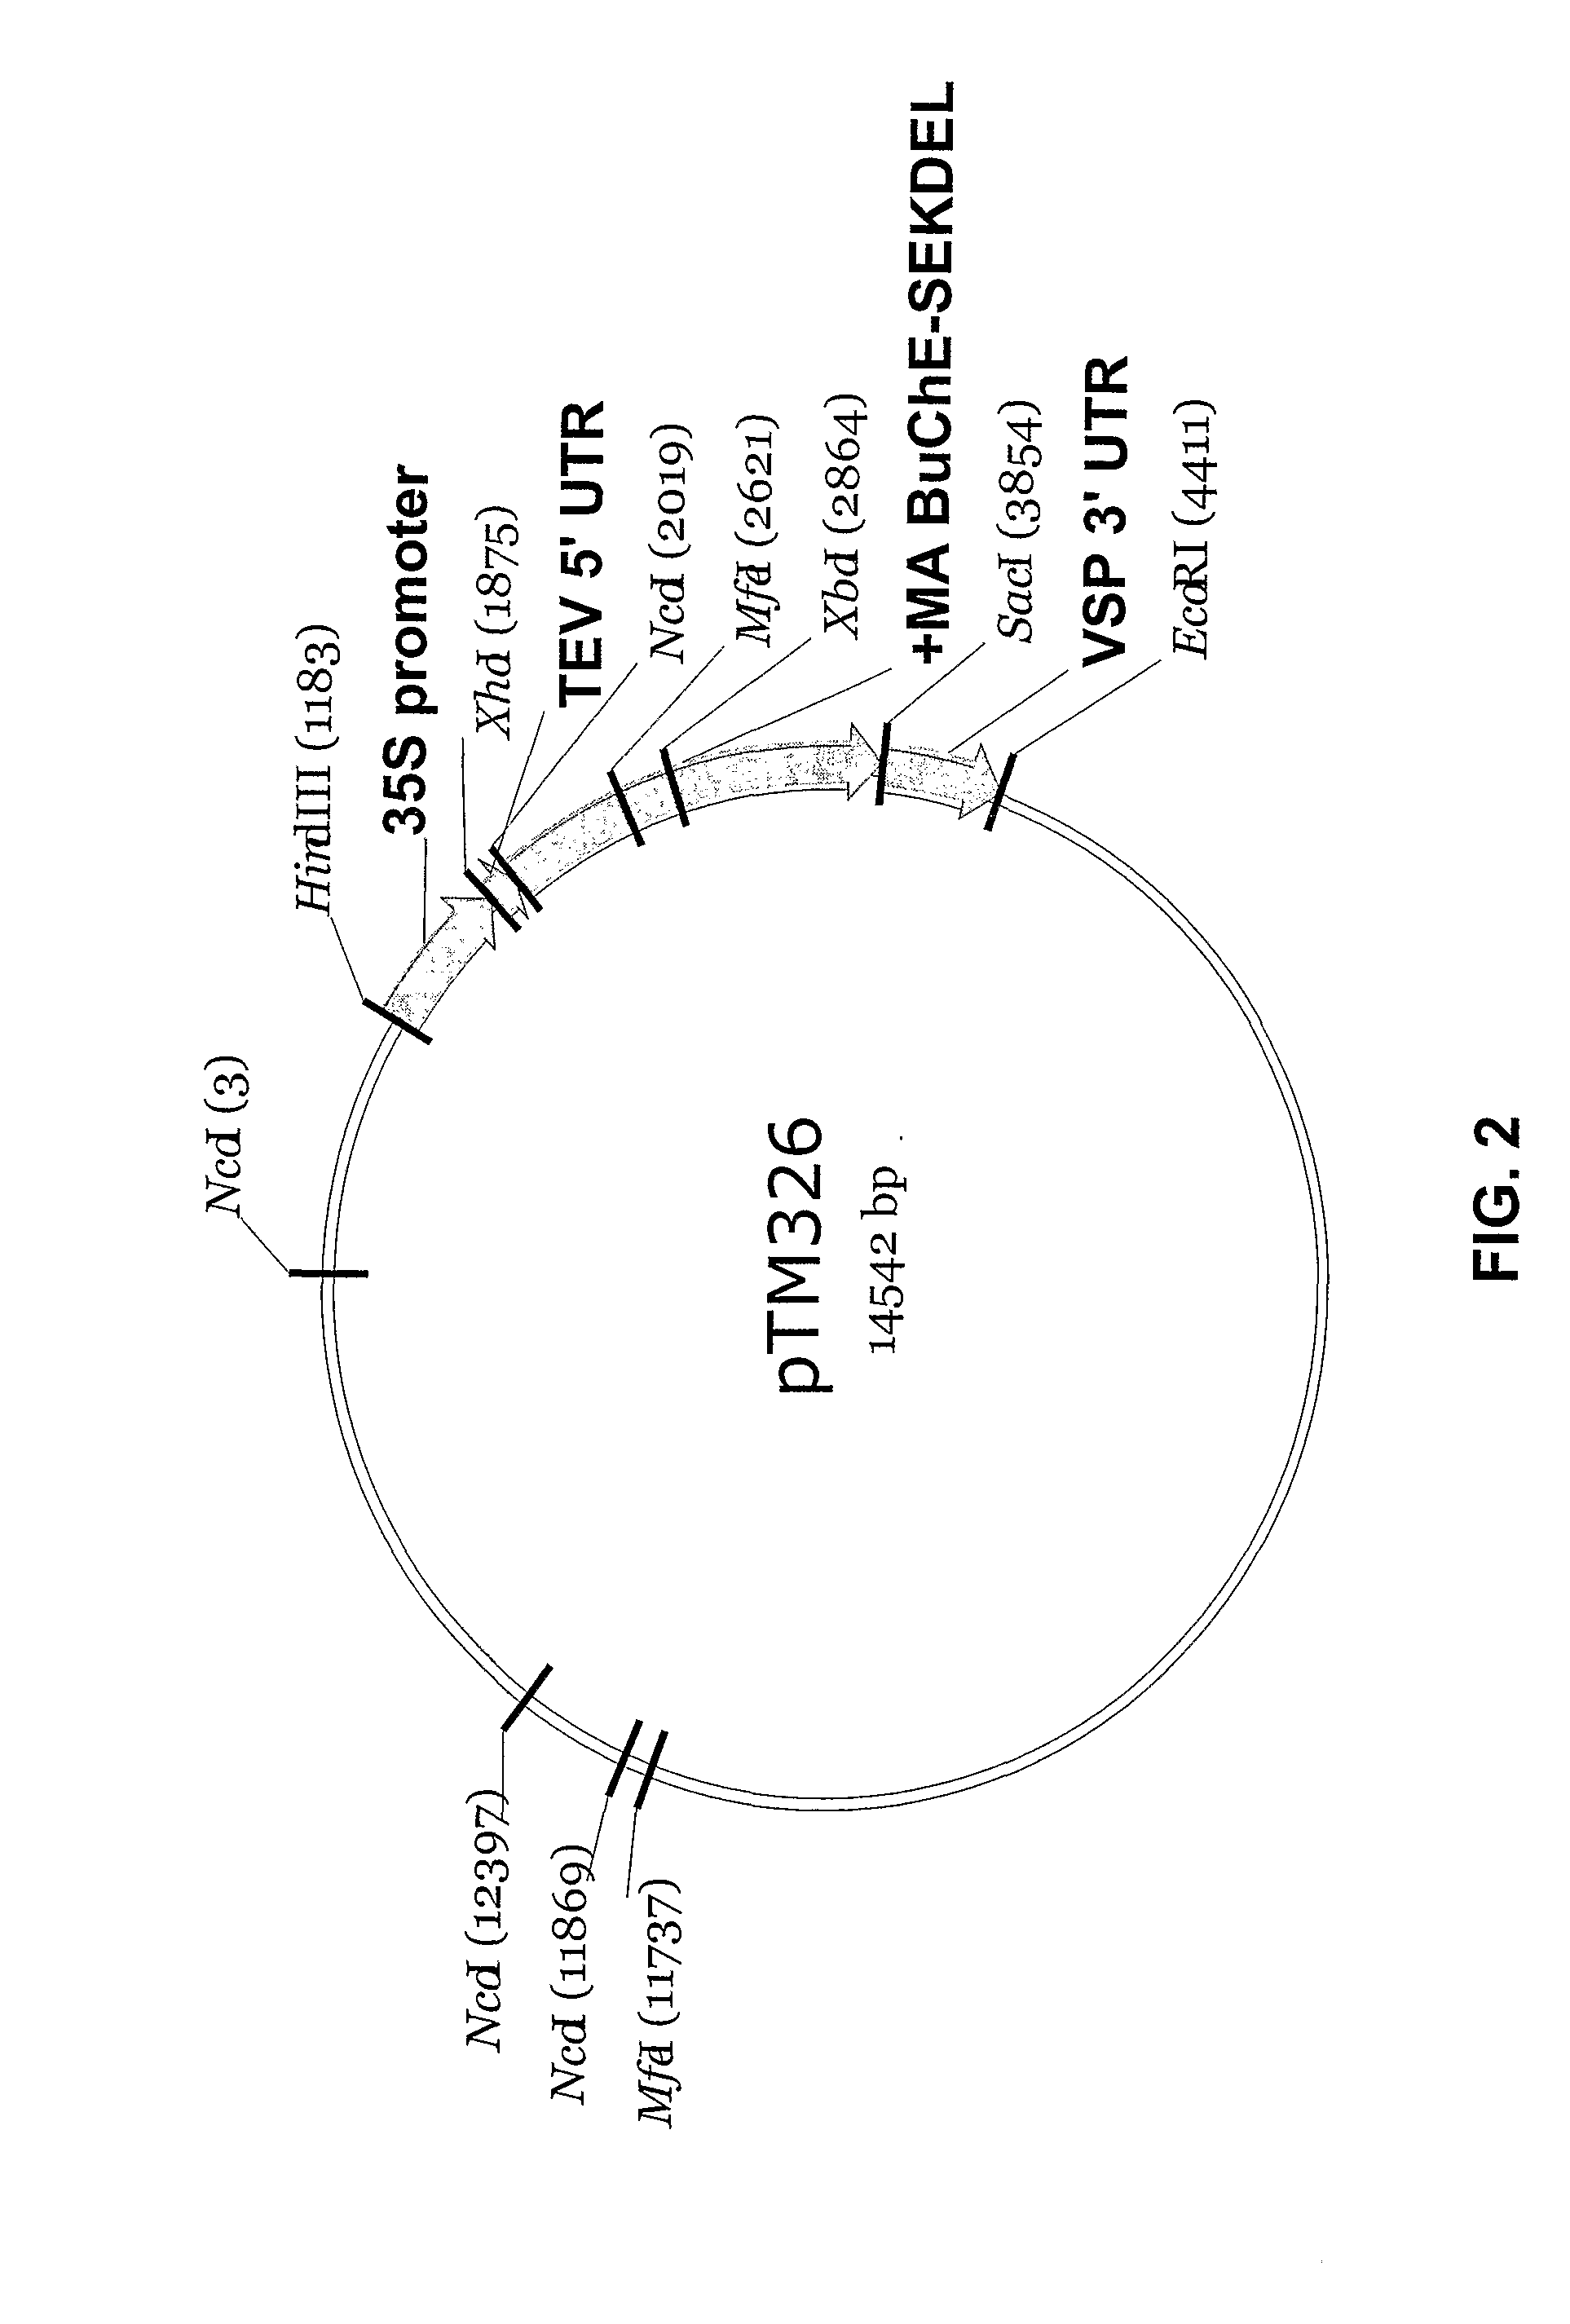 Production and use of human butyrylcholinesterase